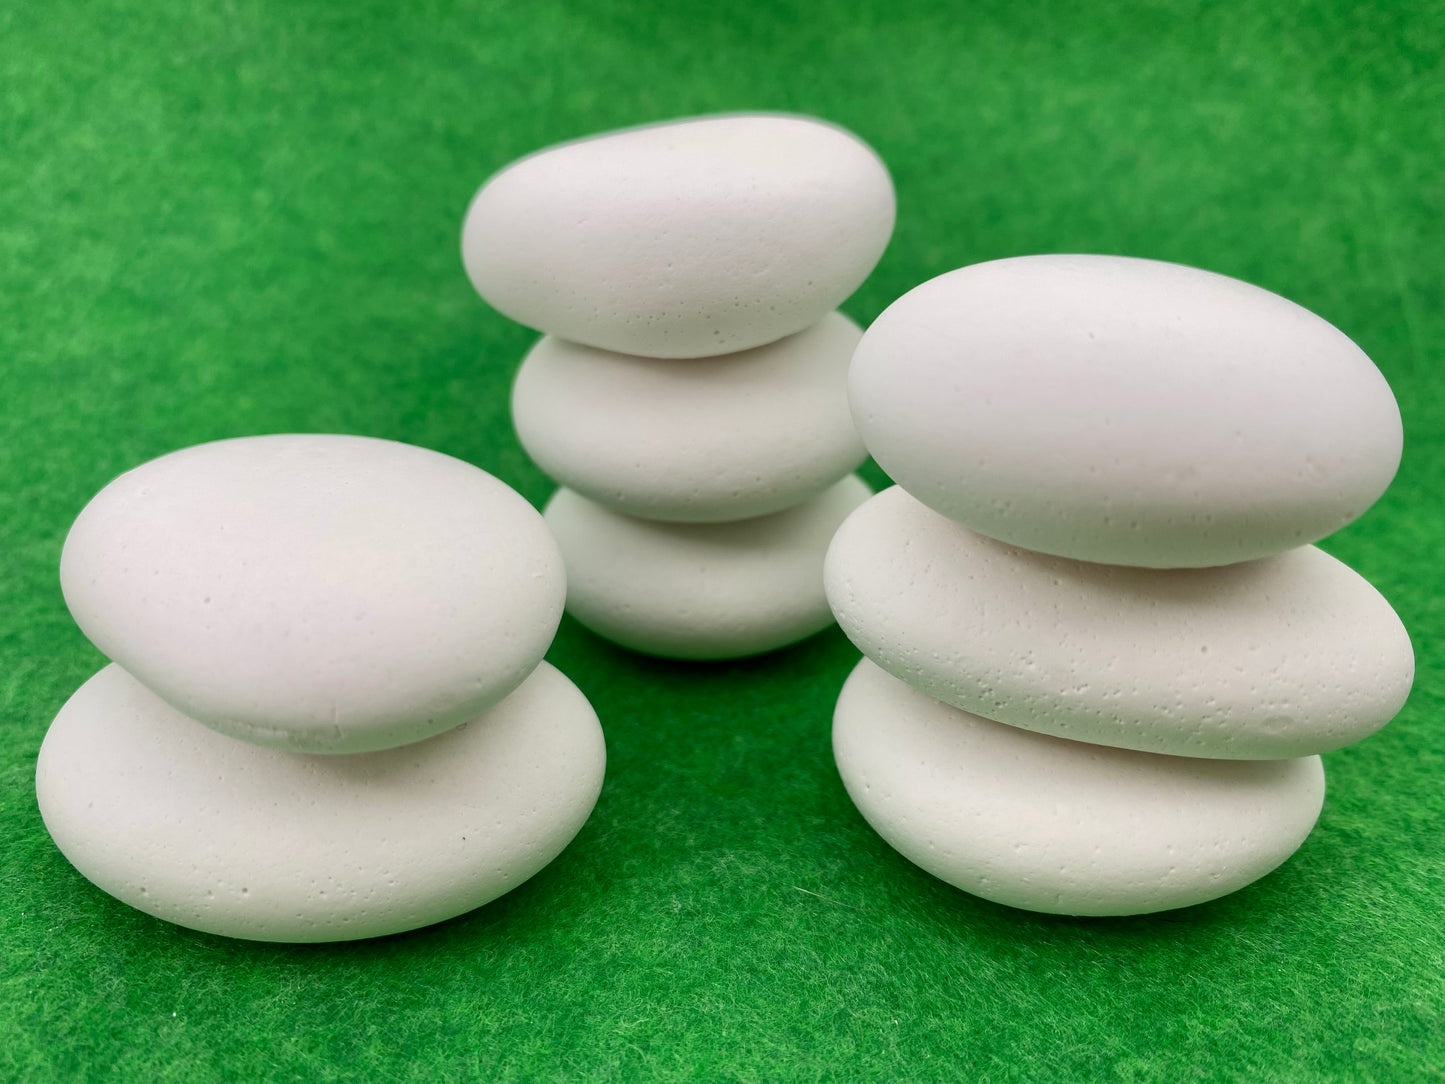 8 small white plaster pebbles of different shapes and sizes stacked on top of each other